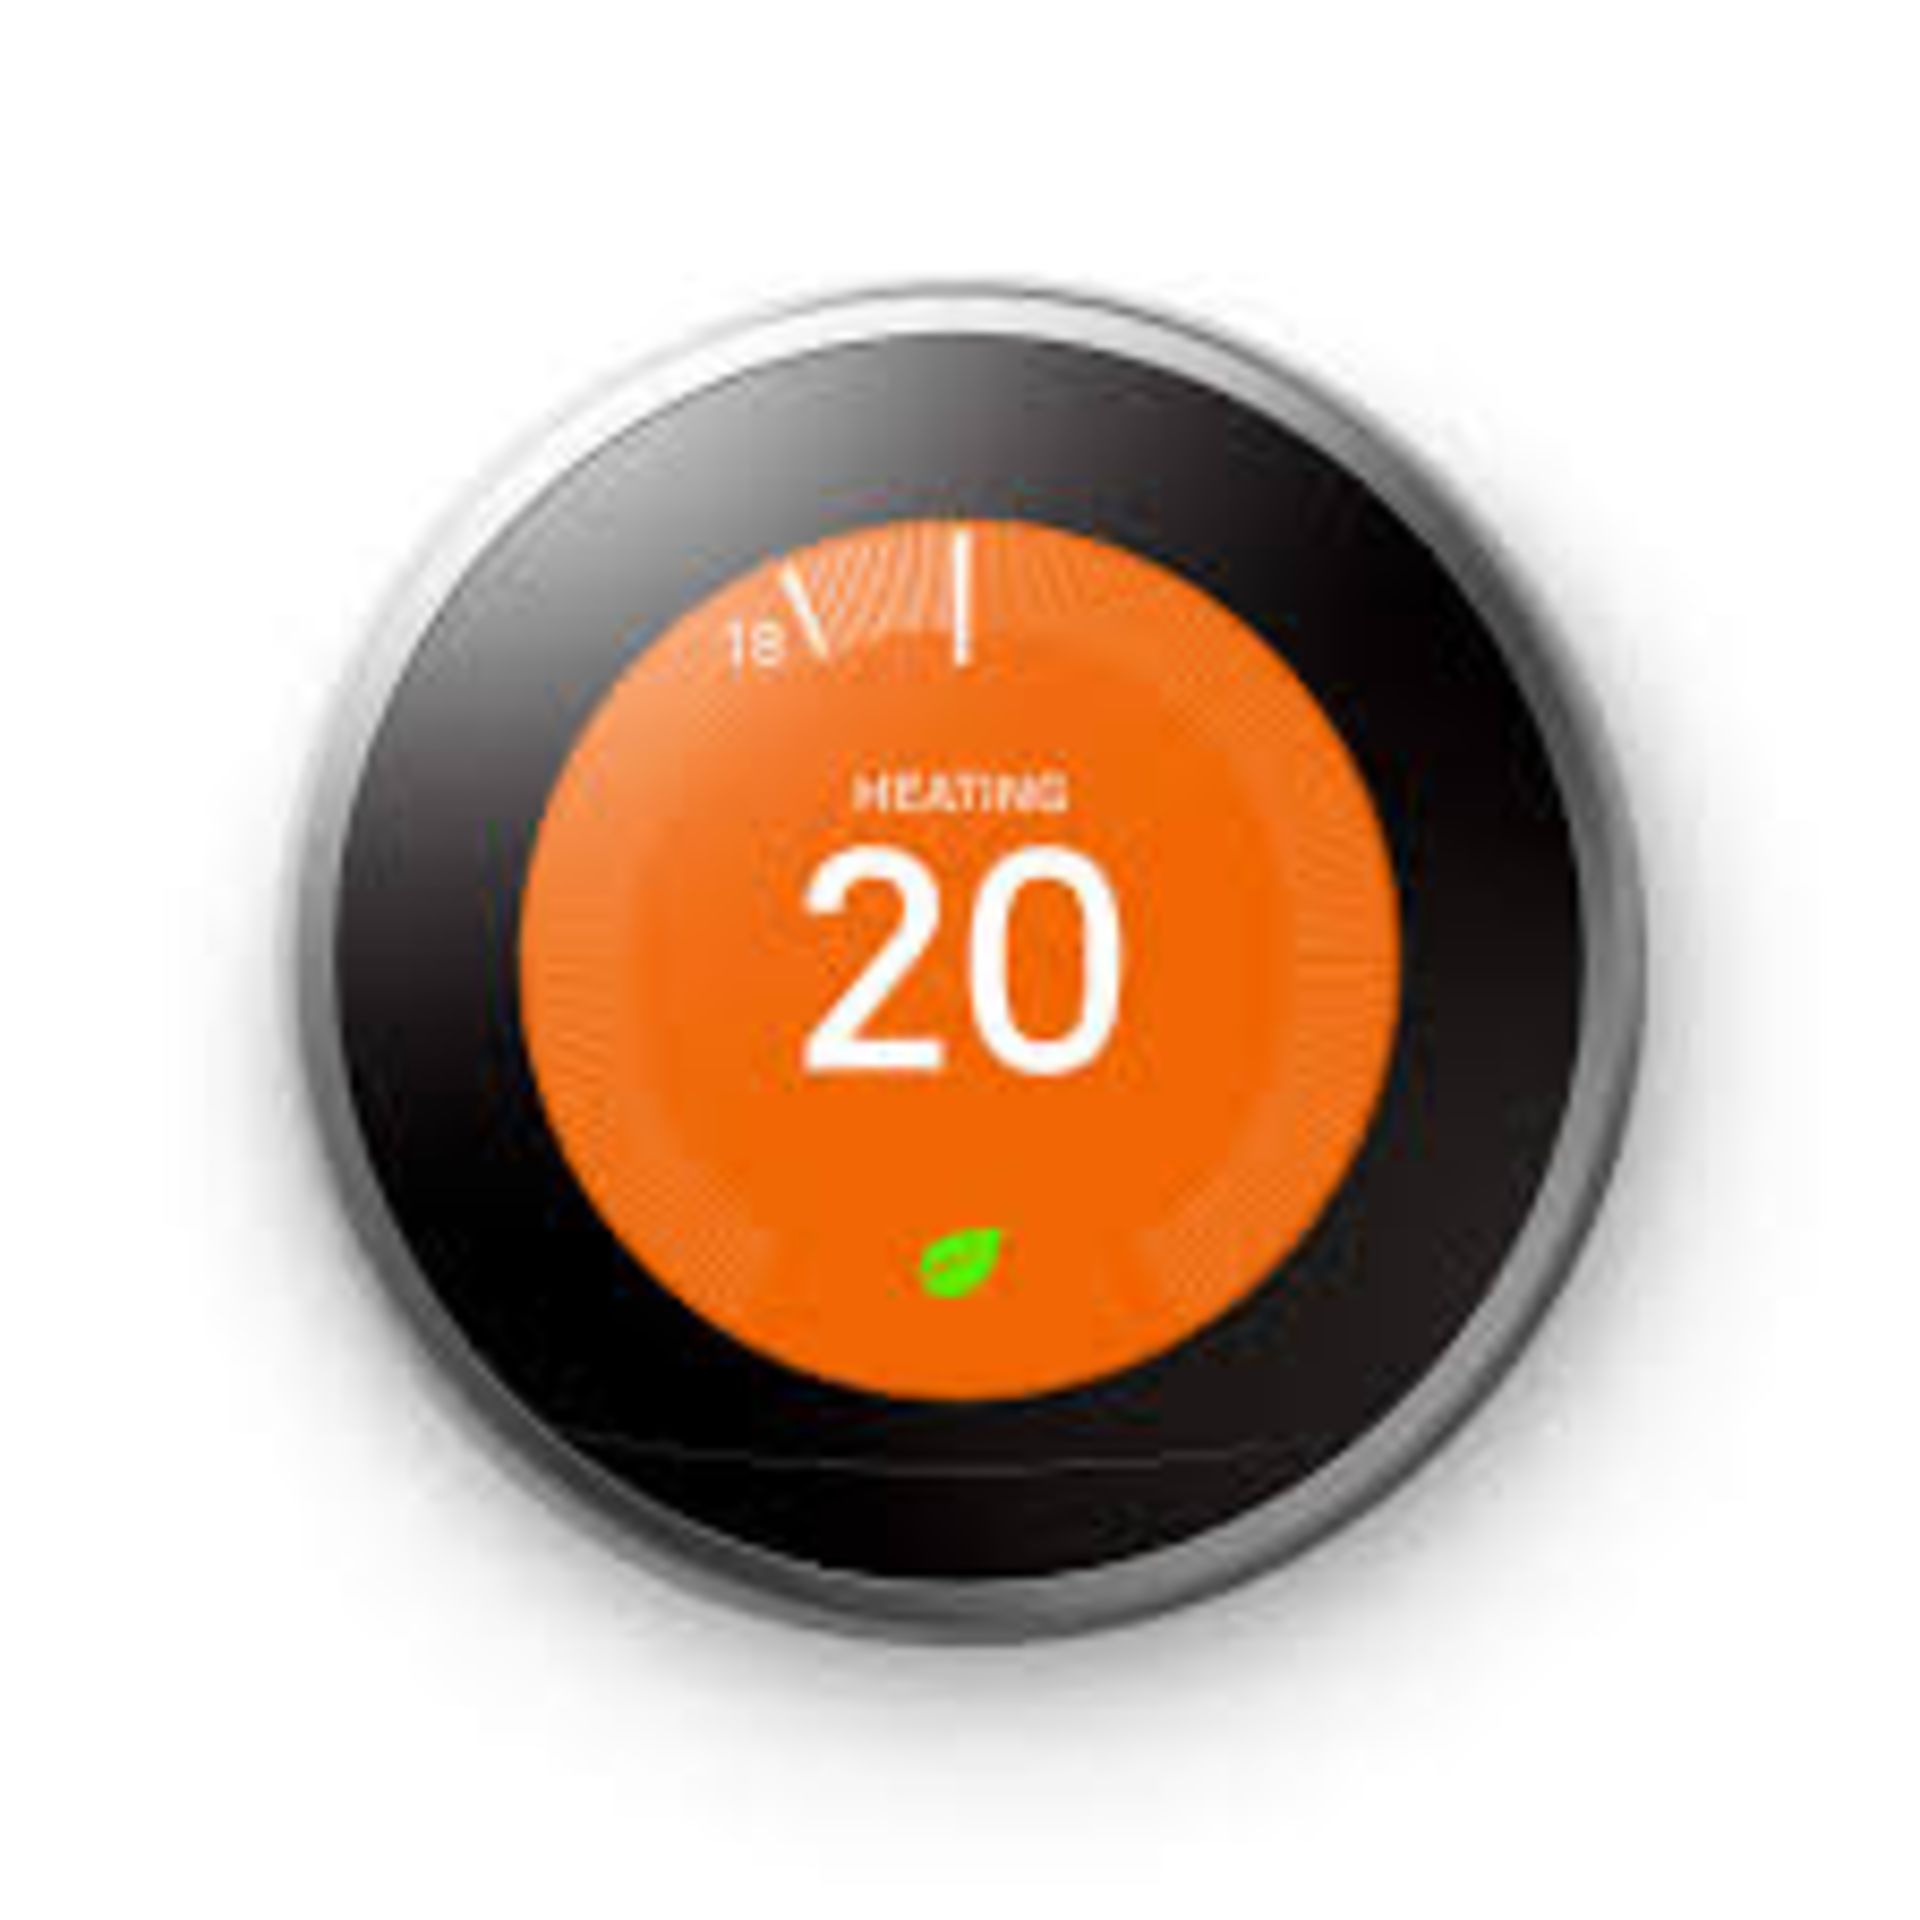 Google Nest Learning Thermostat 3rd Generation, Stainless Steel. - S2.13.